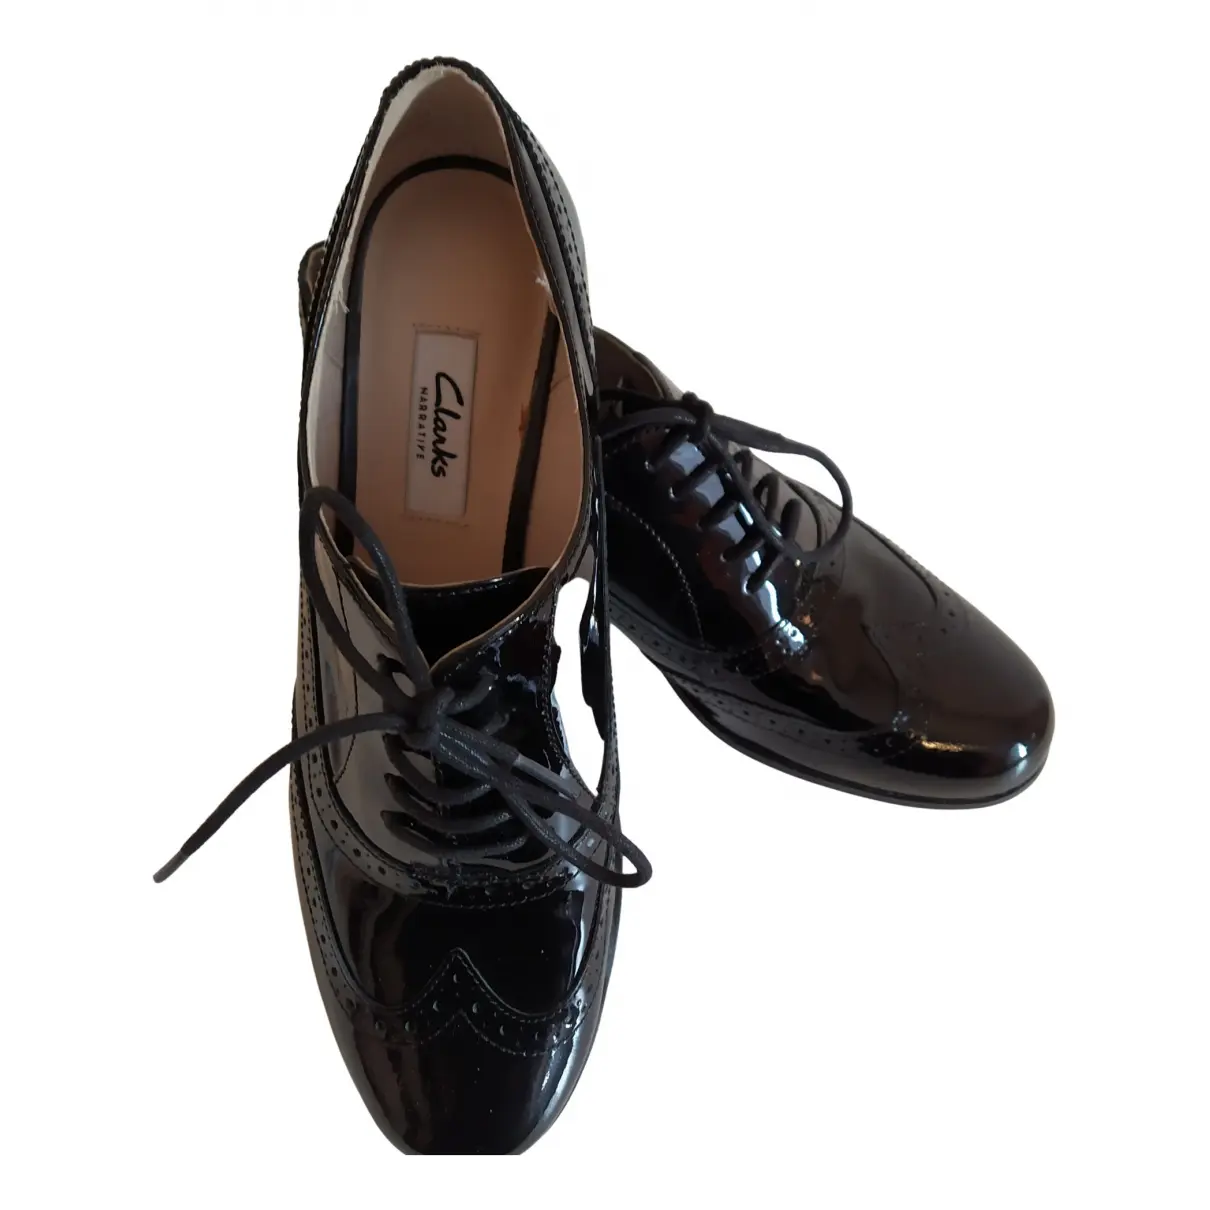 Buy Clarks Patent leather lace ups online